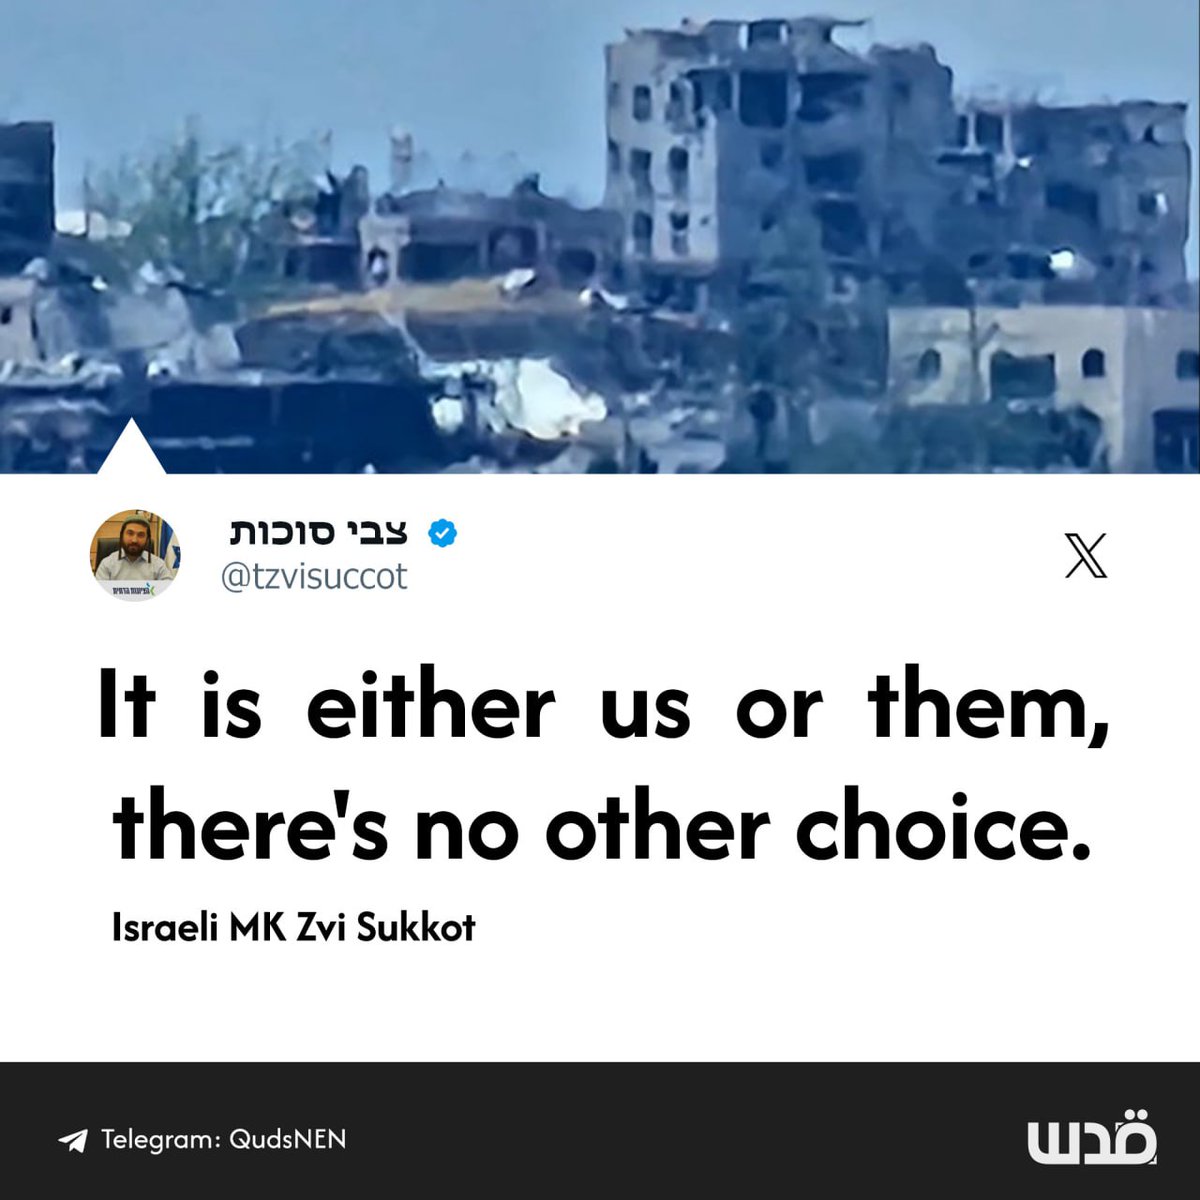 Israeli Knesset member Zvi Sukkot blatantly declared Israeli intention to ethnically cleanse the Palestinian people, posting that it is either the Israelis or native Palestinians.

Sukkot is a resident of Yitzhar, an Israeli settlement in the occupied West Bank known for being a